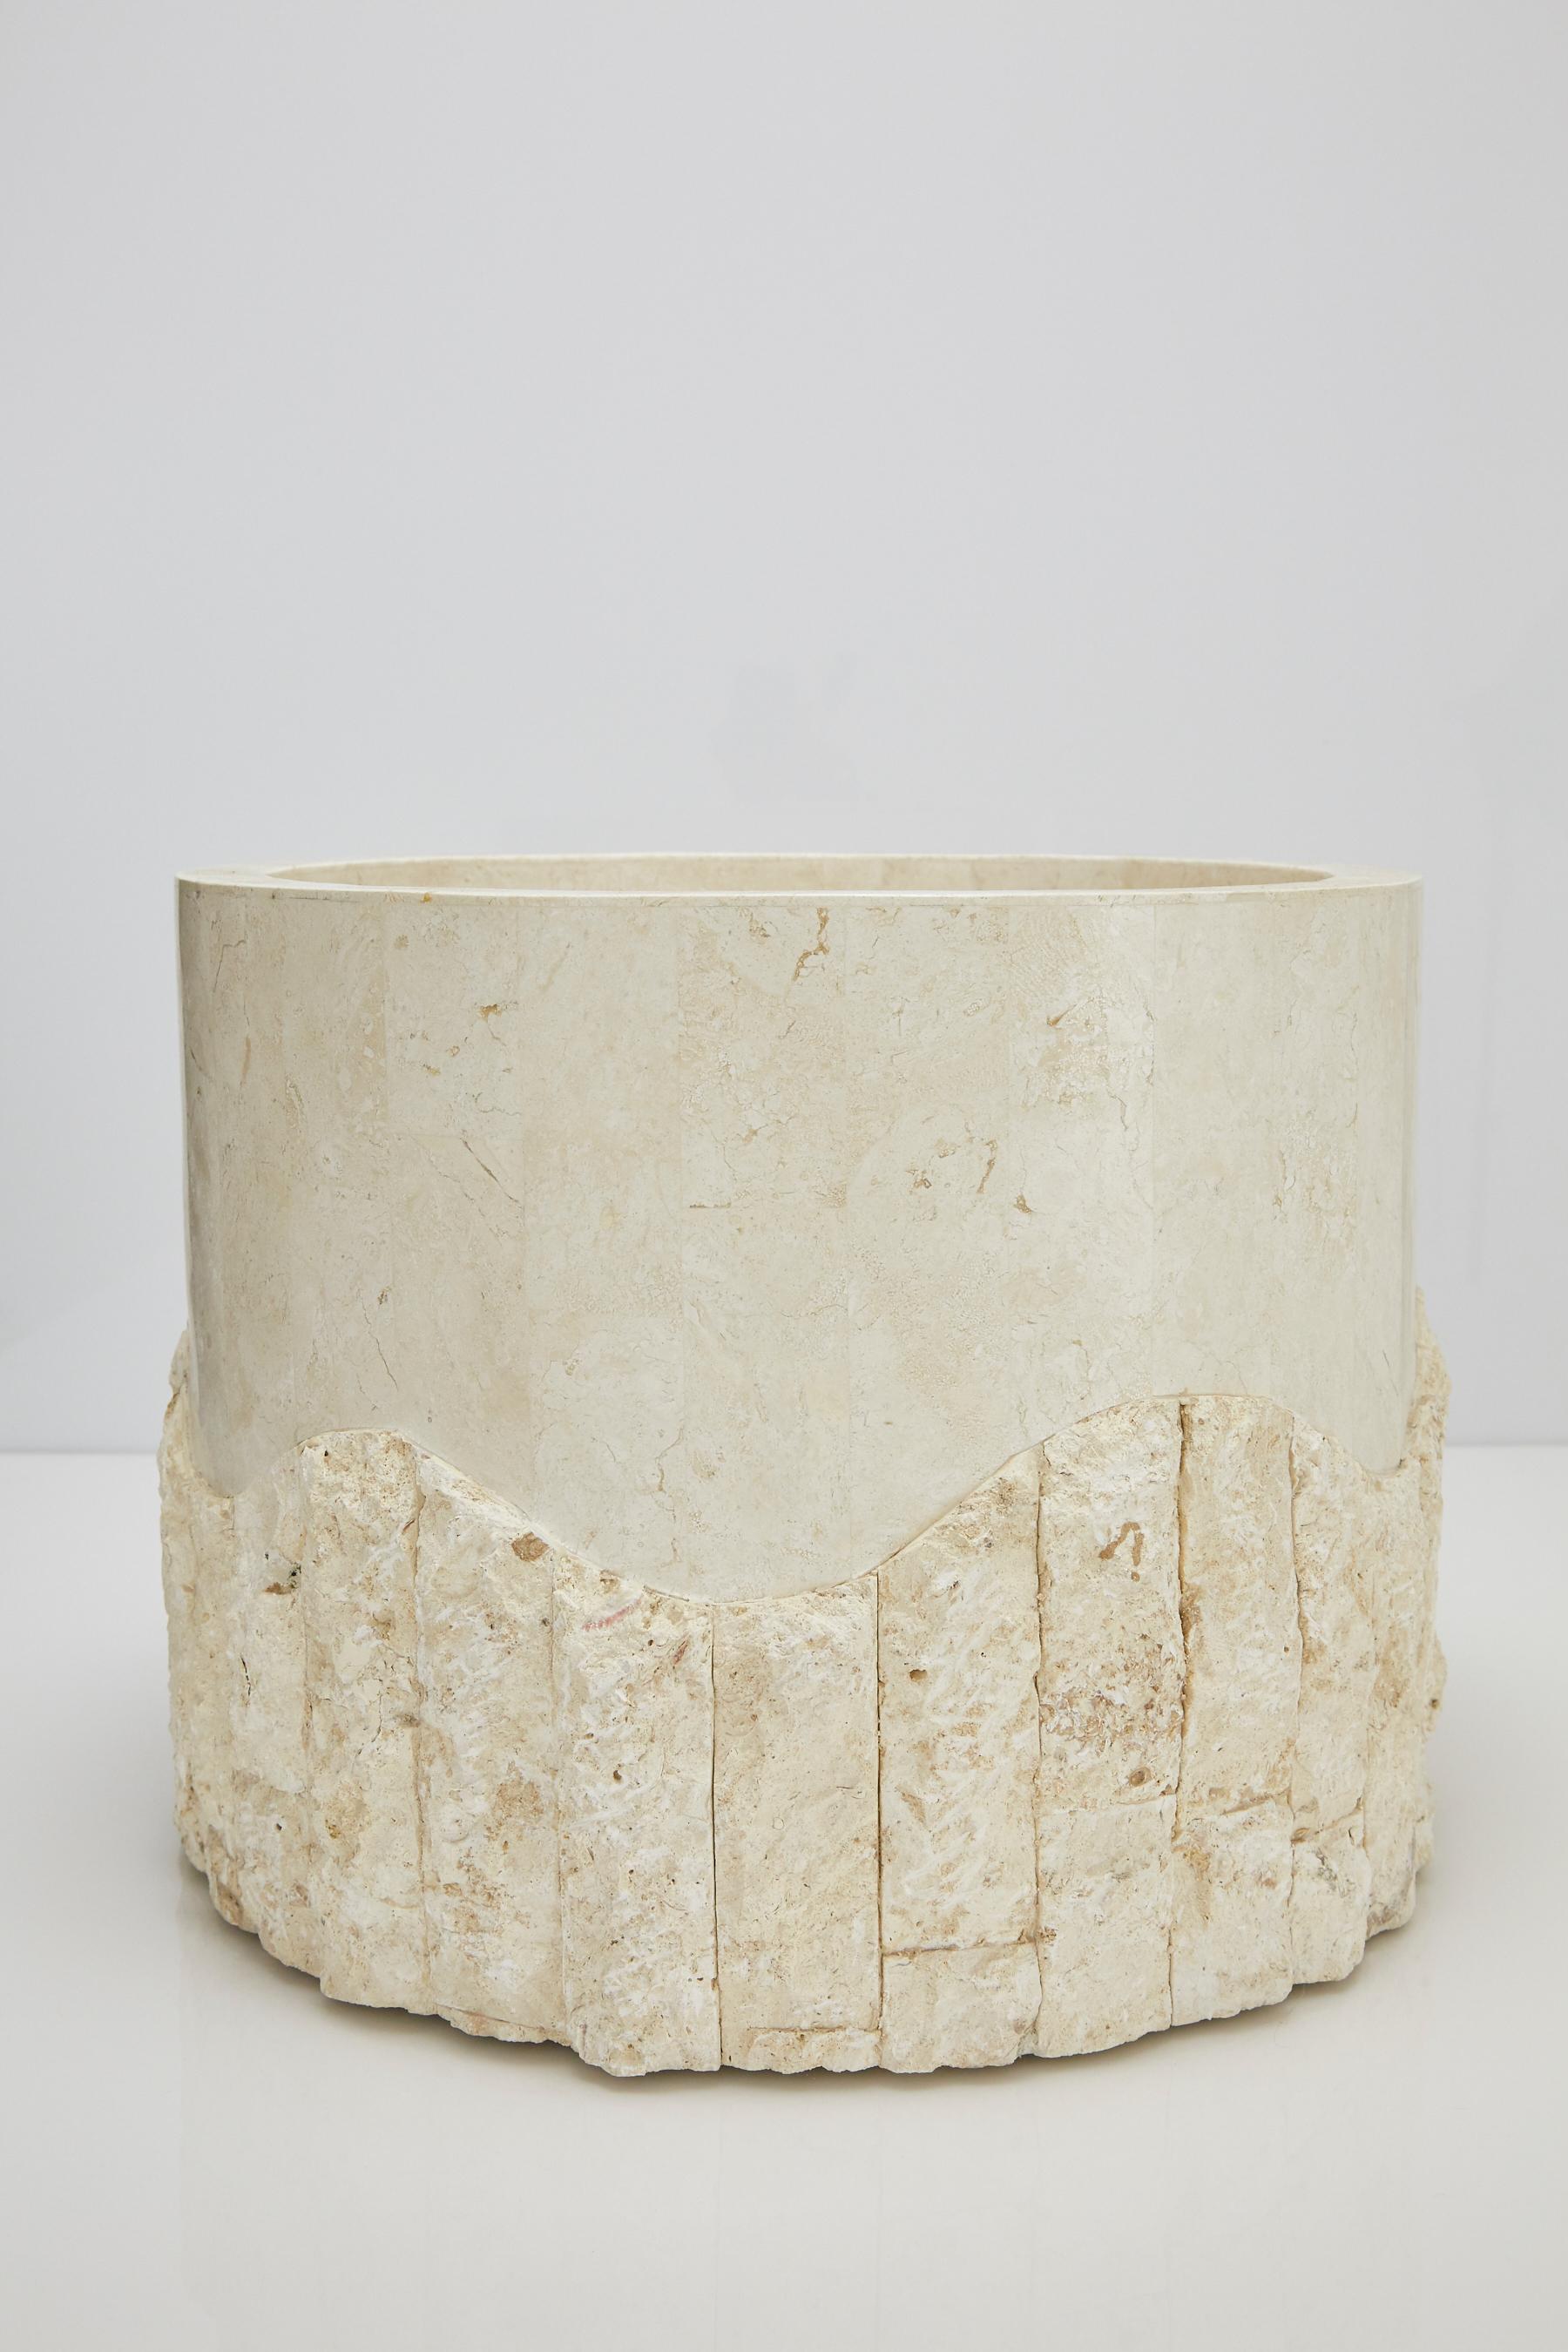 Post-Modern Large Postmodern Round Tessellated Stone Planter in Rough and Smooth, 1990s For Sale